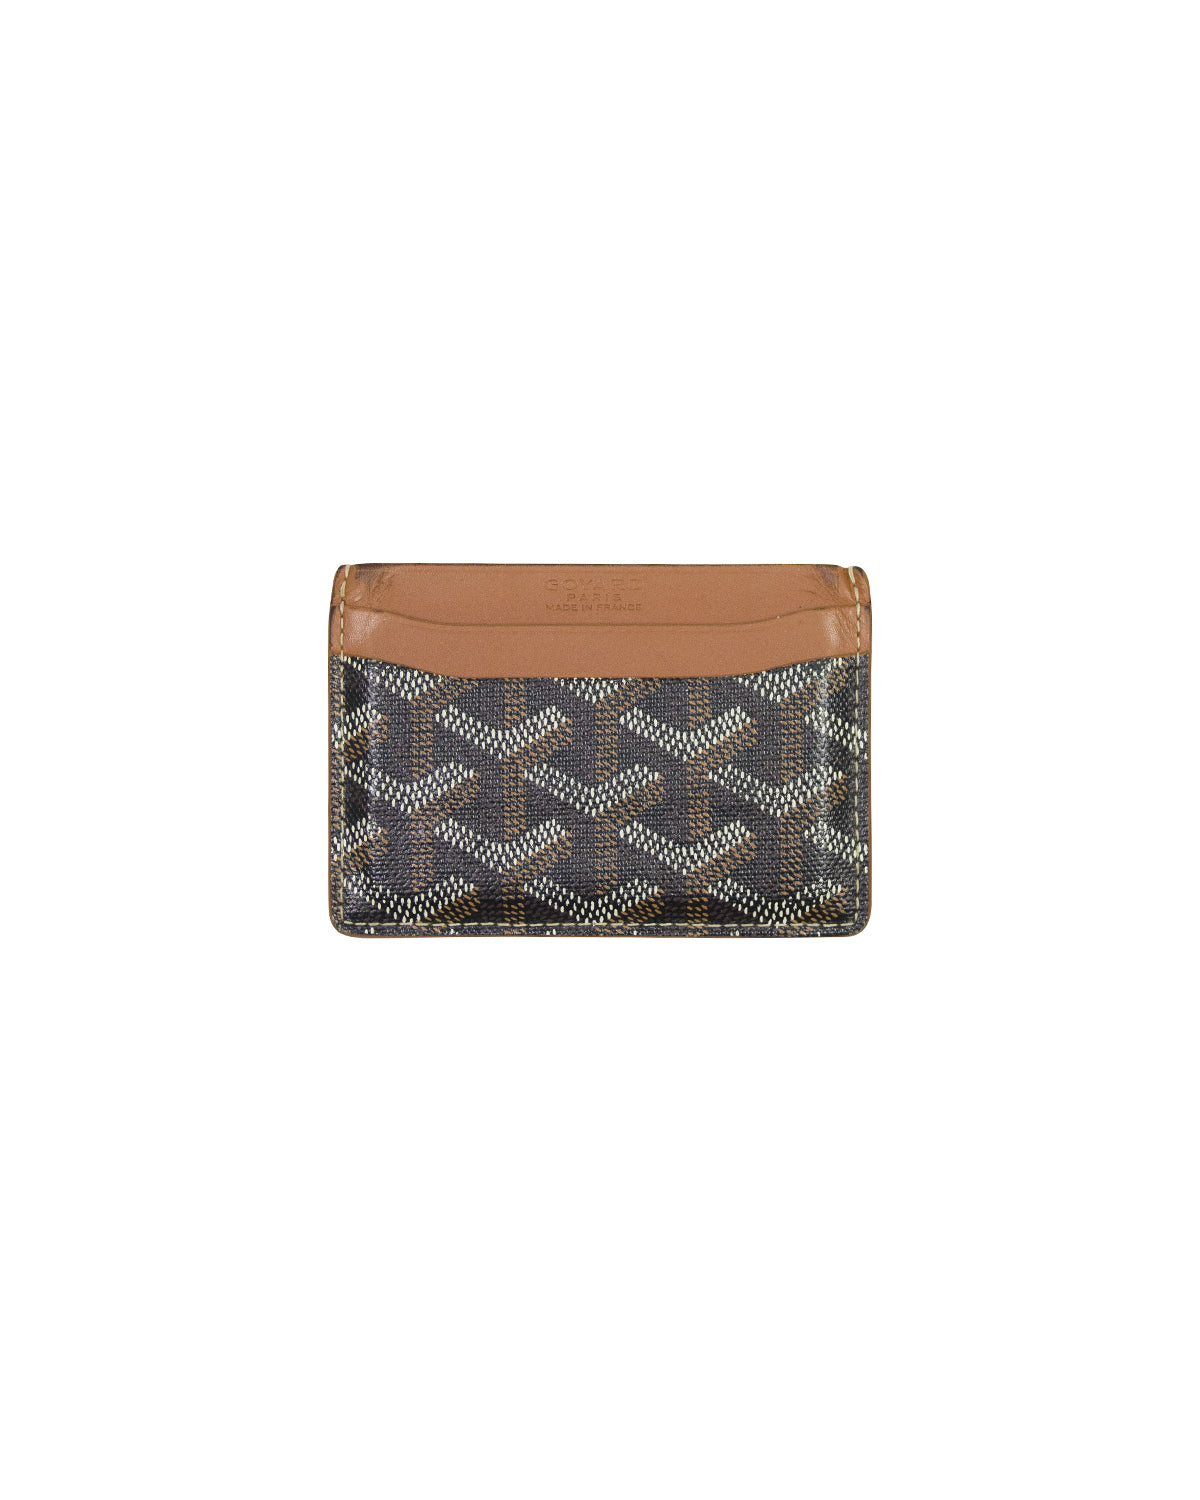 Goyard Card Holder  Goyard card holder, Goyard bag, Small leather goods